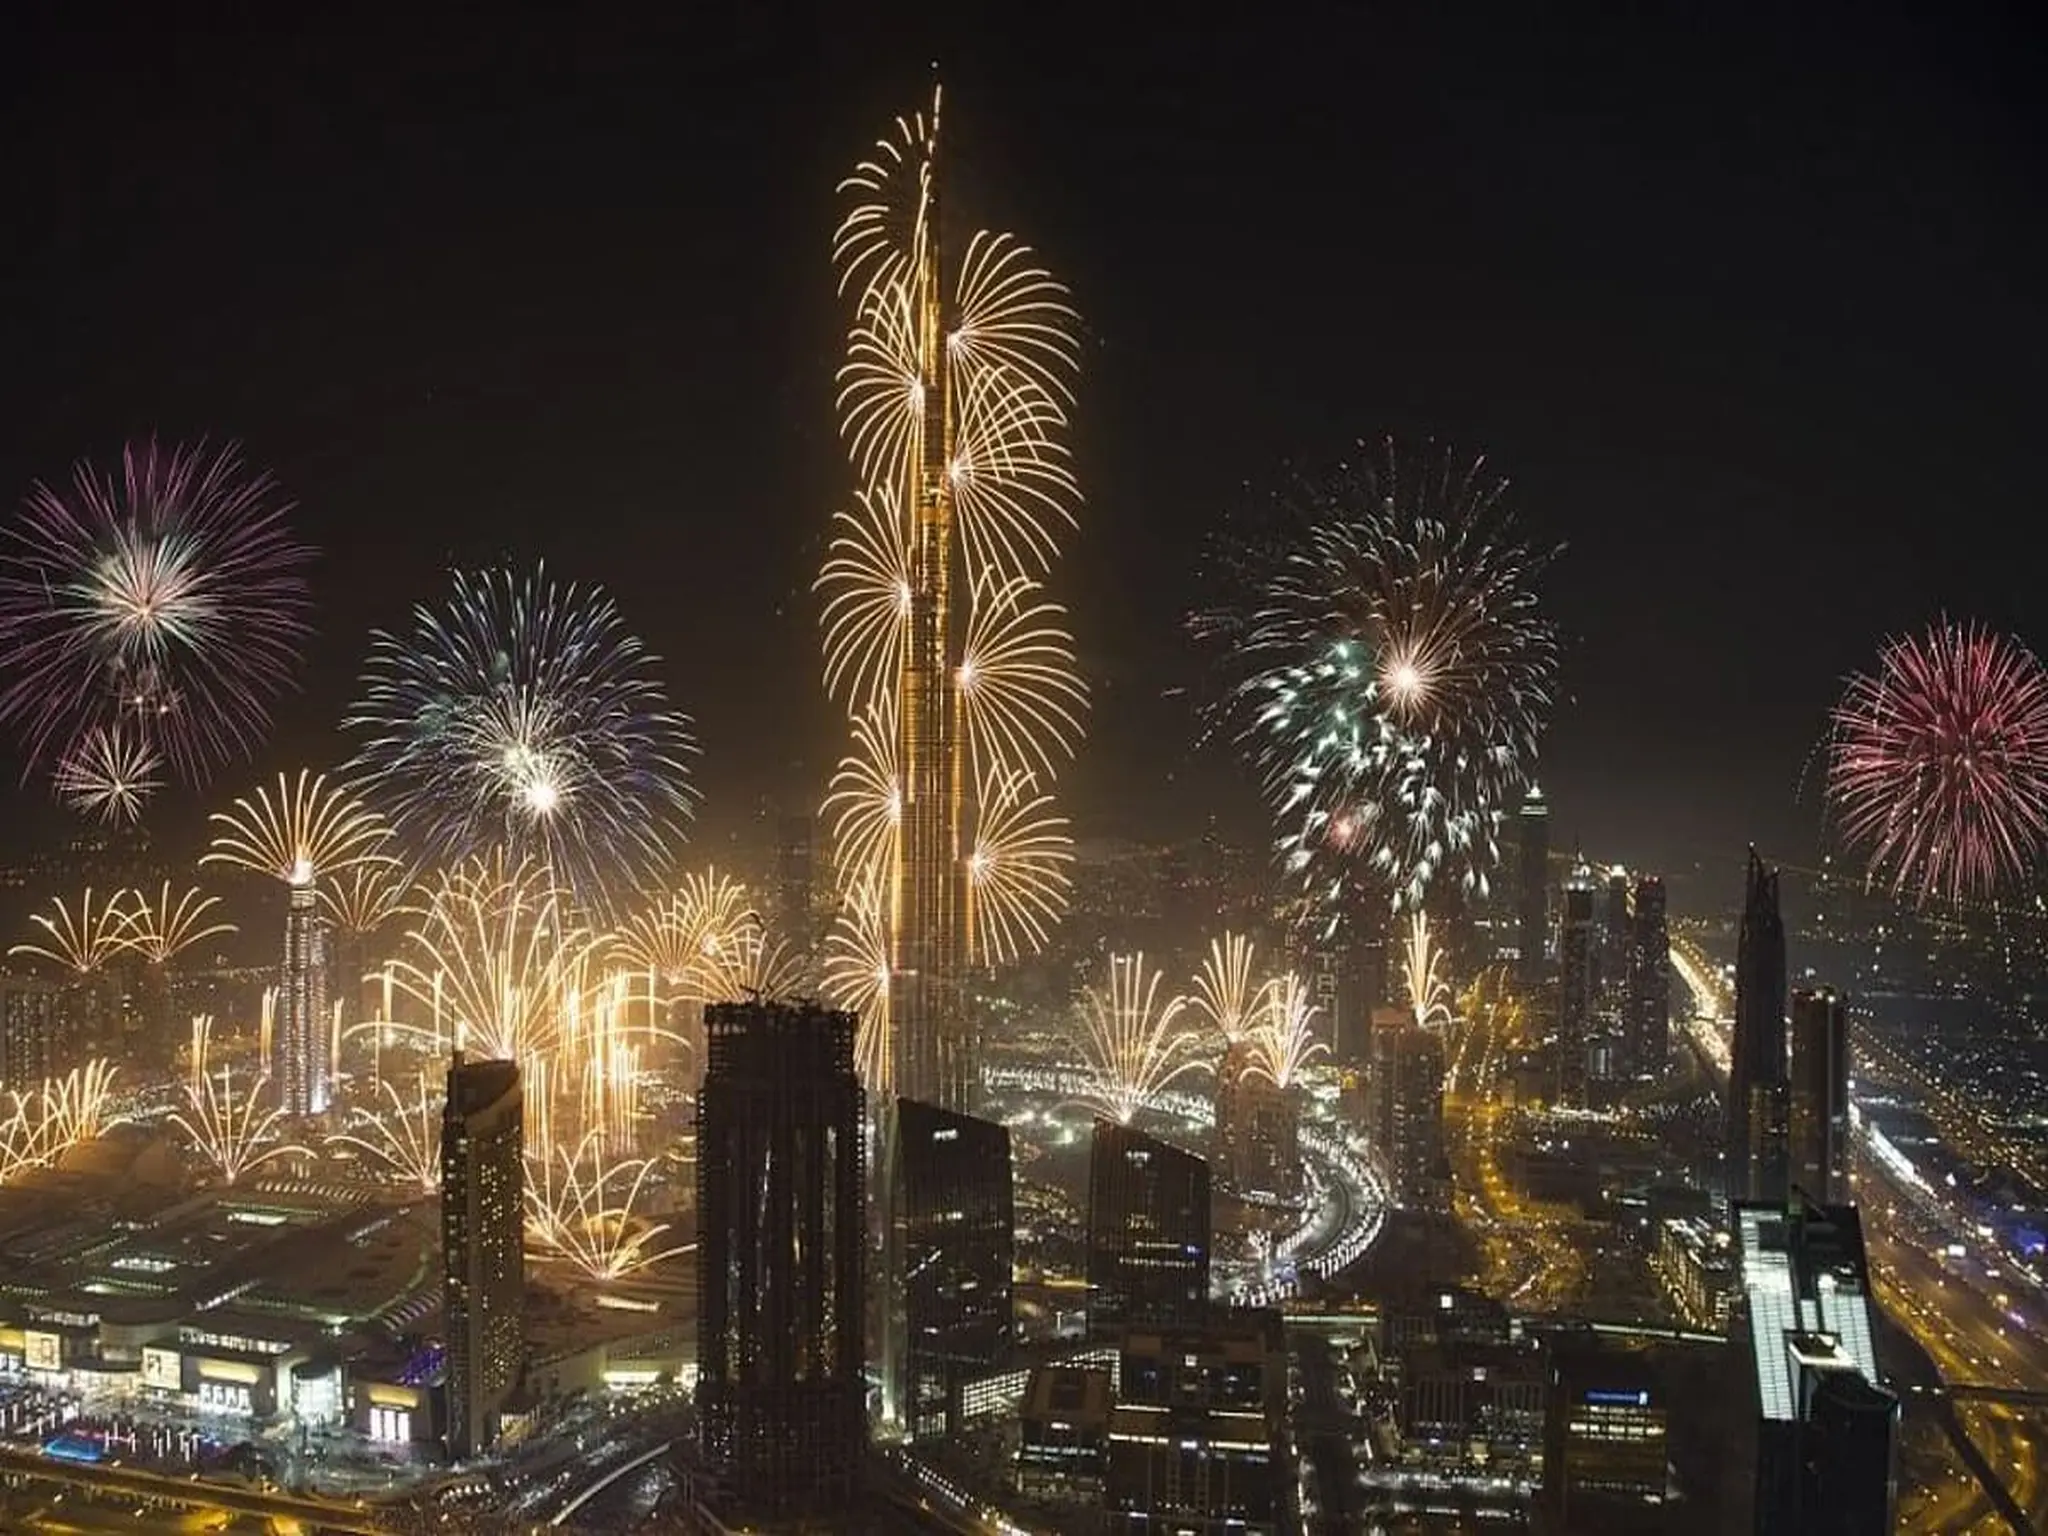 The UAE announces a 3-day holiday in addition to the New Year holiday